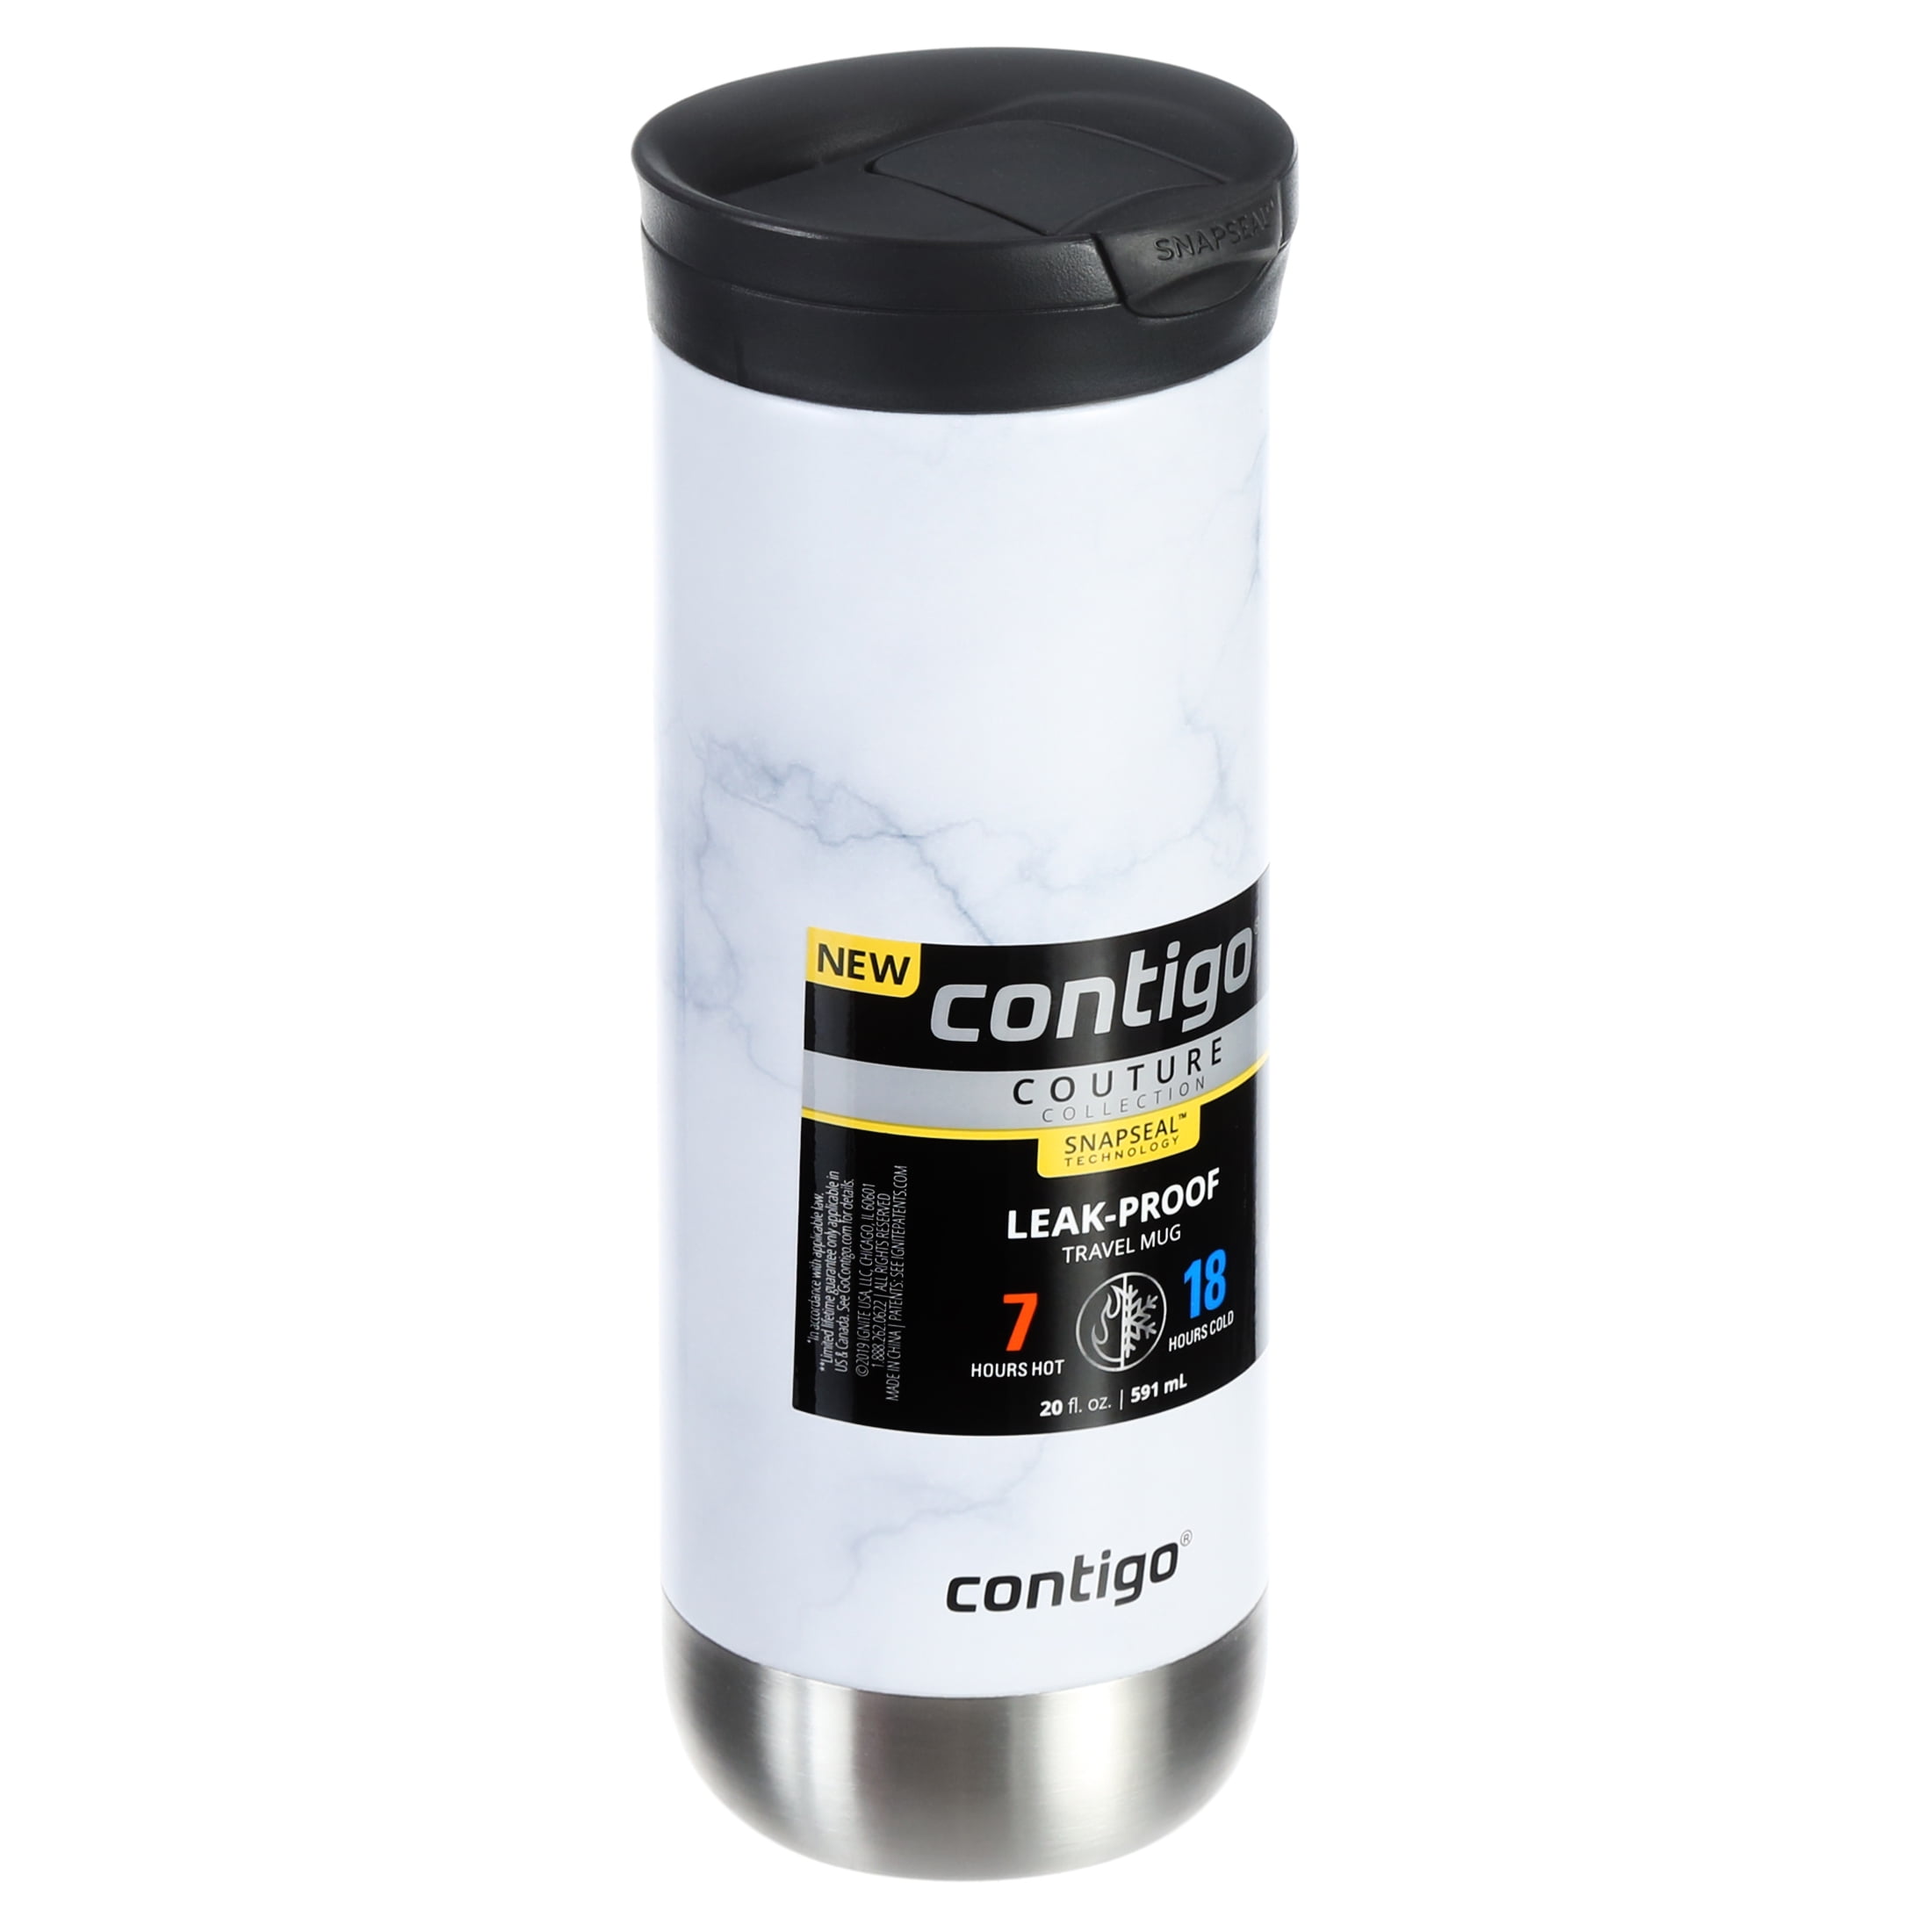 Contigo - As a leading innovator of water bottles, travel mugs and